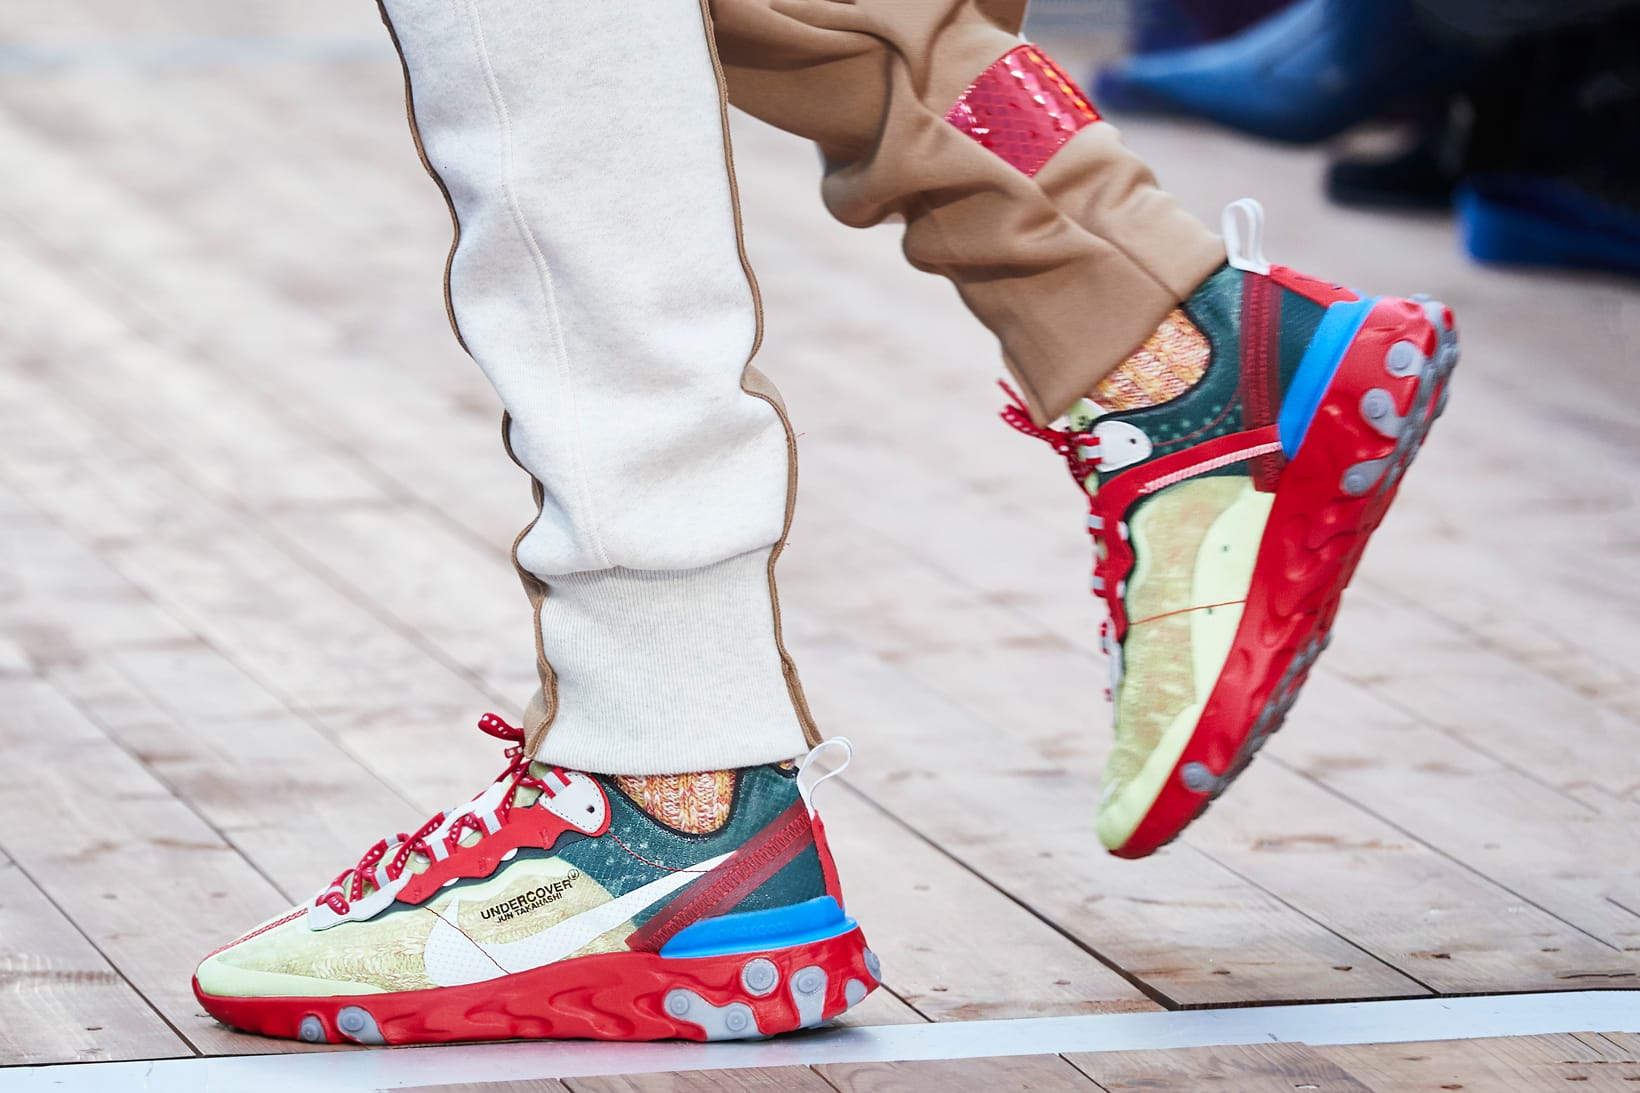 nike react element 87 red and white